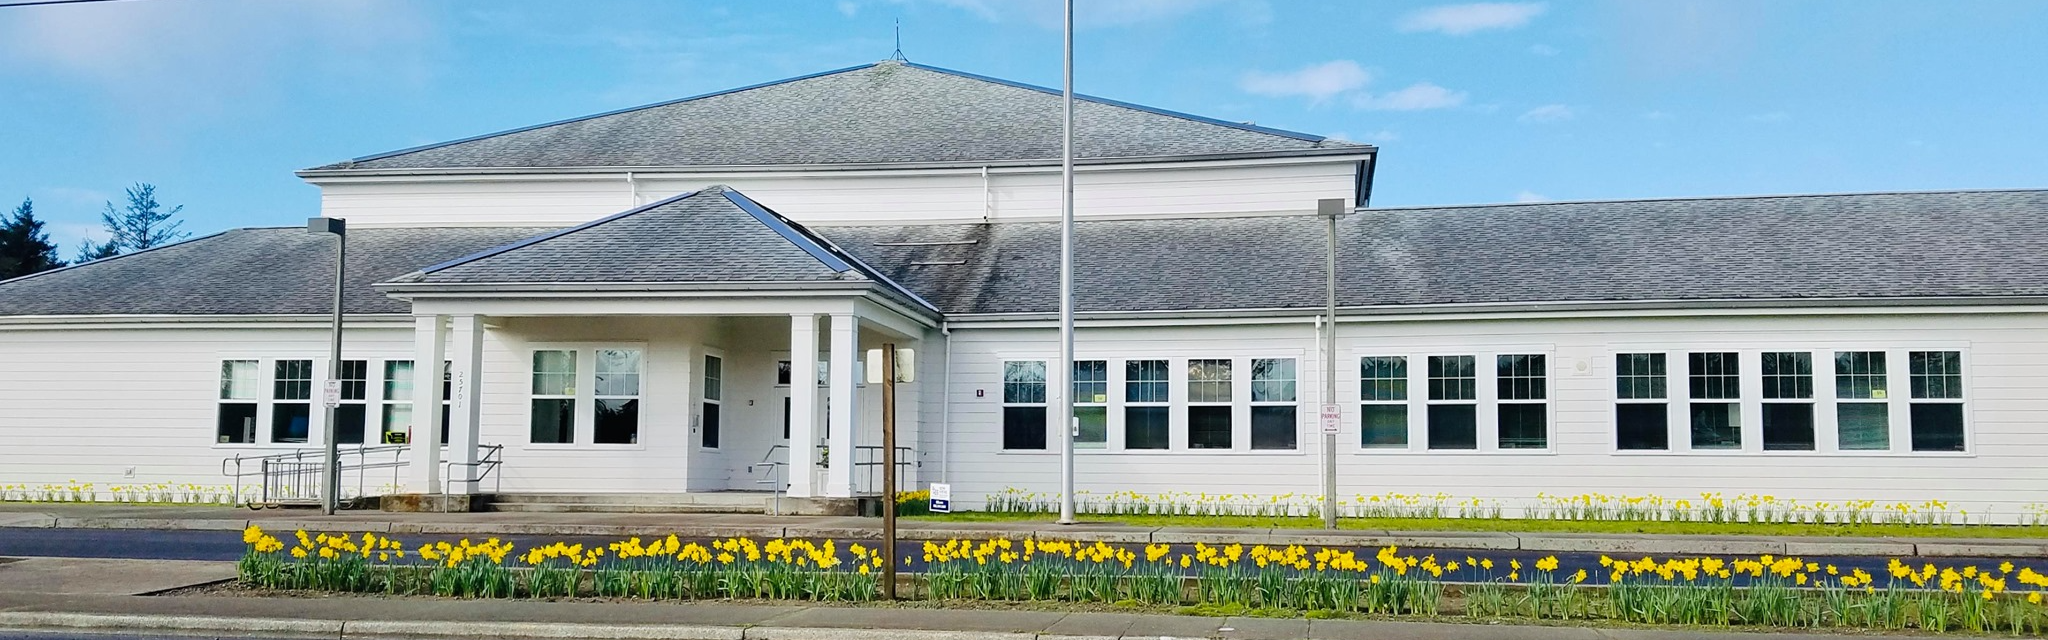 Front of School with Daffodils Blooming